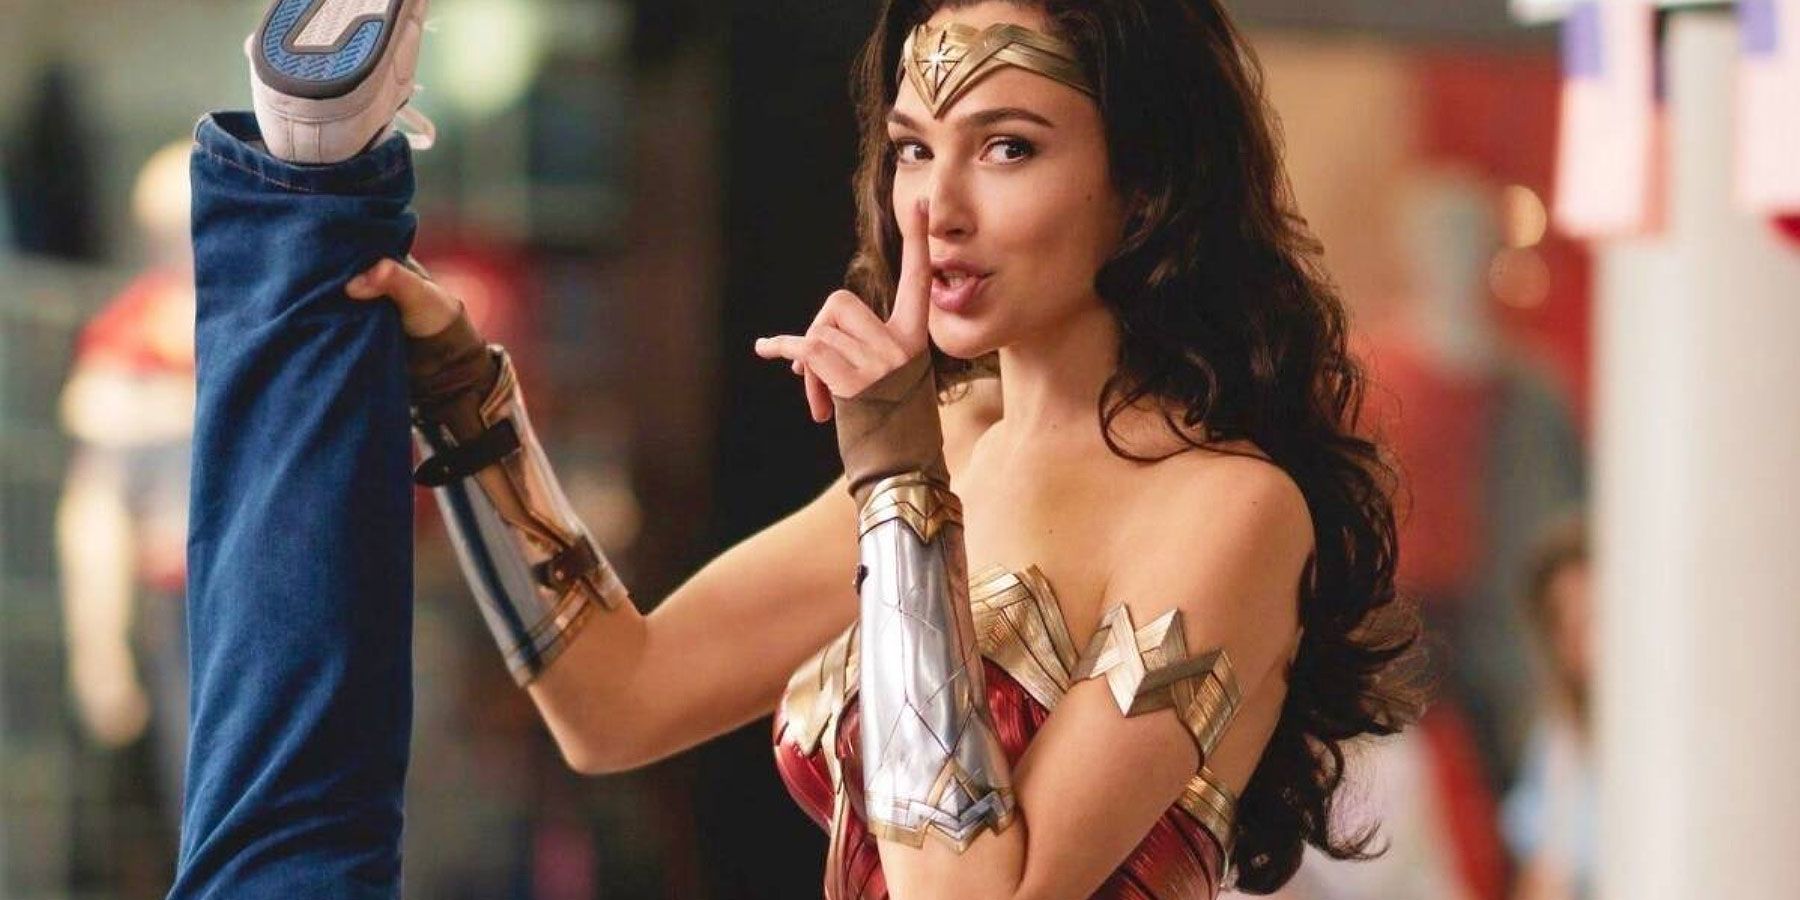 A scene from Wonder Woman: 1984 where Wonder Woman (Gal Gadot) holds a criminal by the leg.